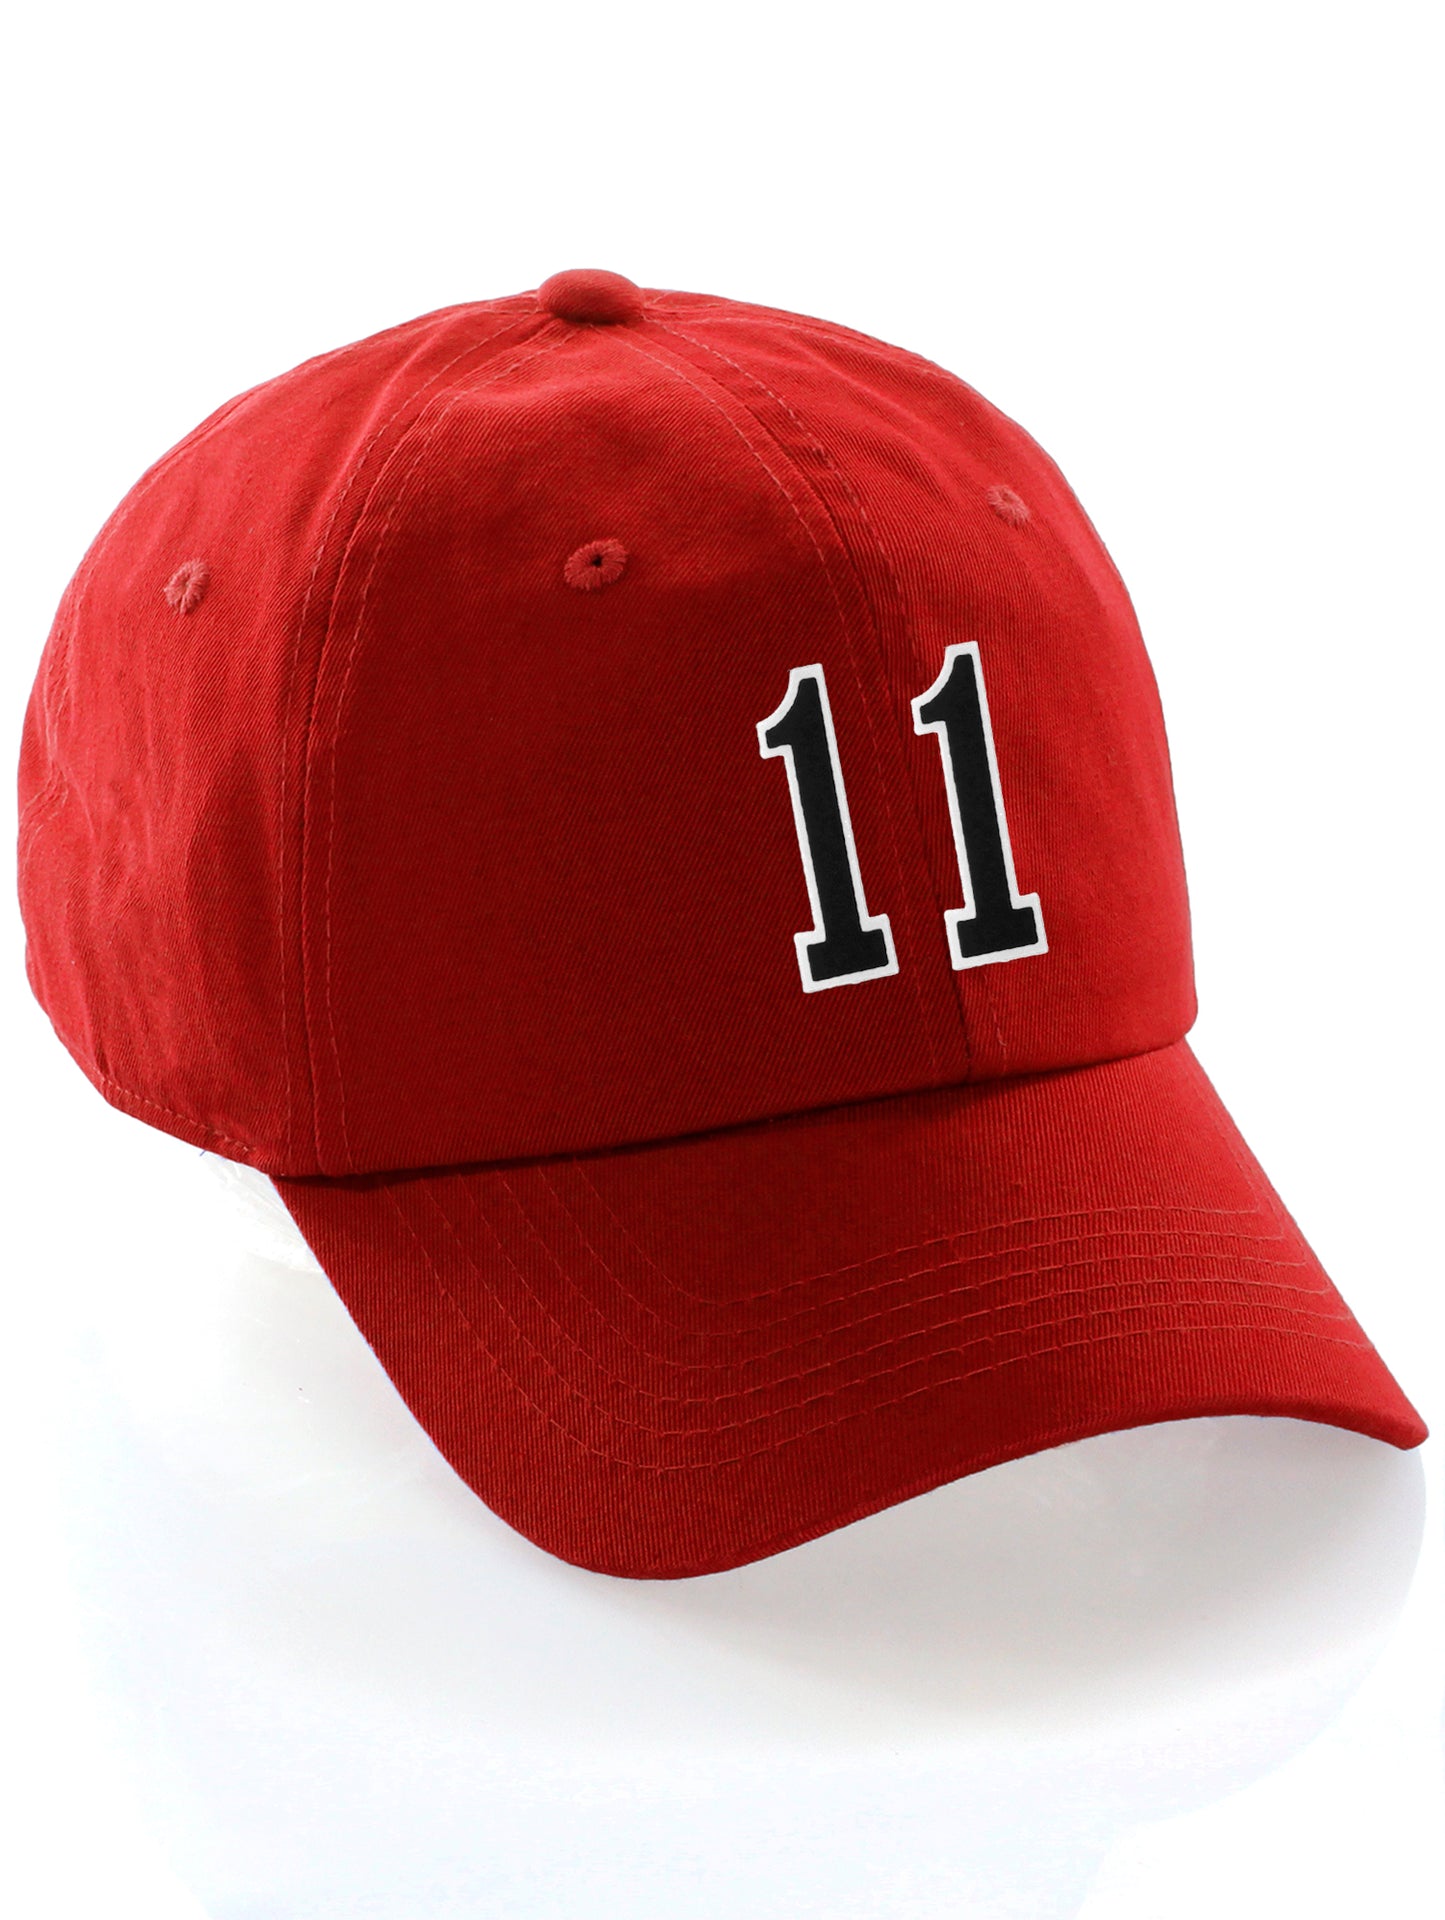 Customized Number Hat 00 to 99 Team Colors Baseball Cap, Red Hat White Black